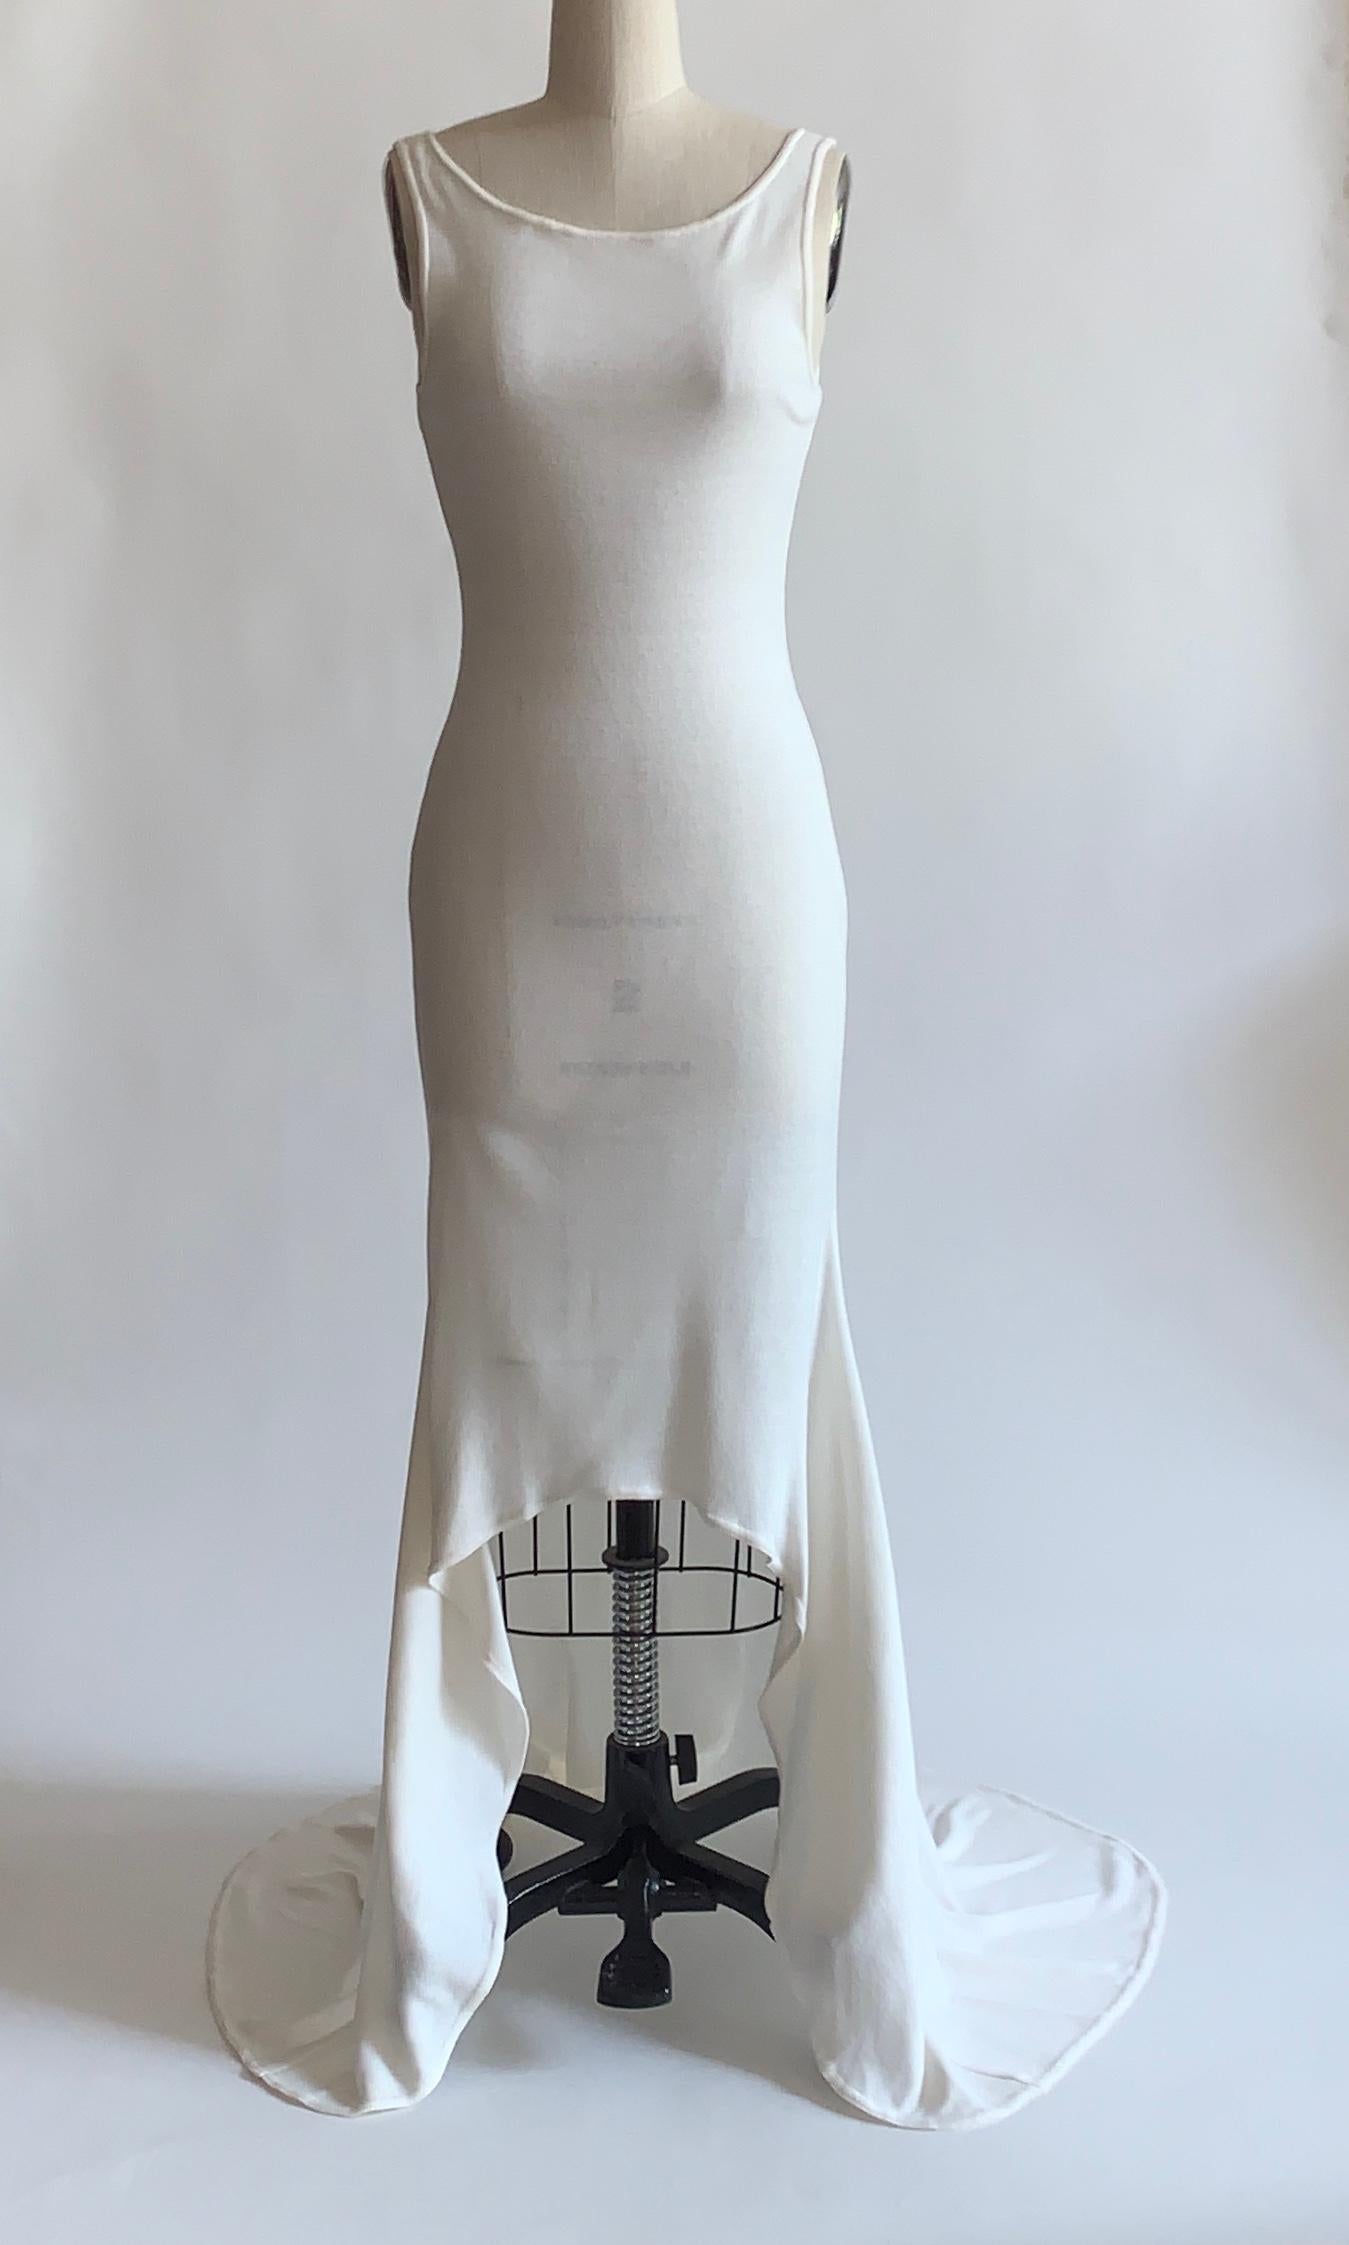 Patrick Kelly vintage 1980s white sleeveless hi-lo knit maxi dress with deep scoop back. Somewhat sheer, works best with nude shape wear or as a pool or swim cover up. Pull-on, no closure. 

No designer or size label, item is a sample from an